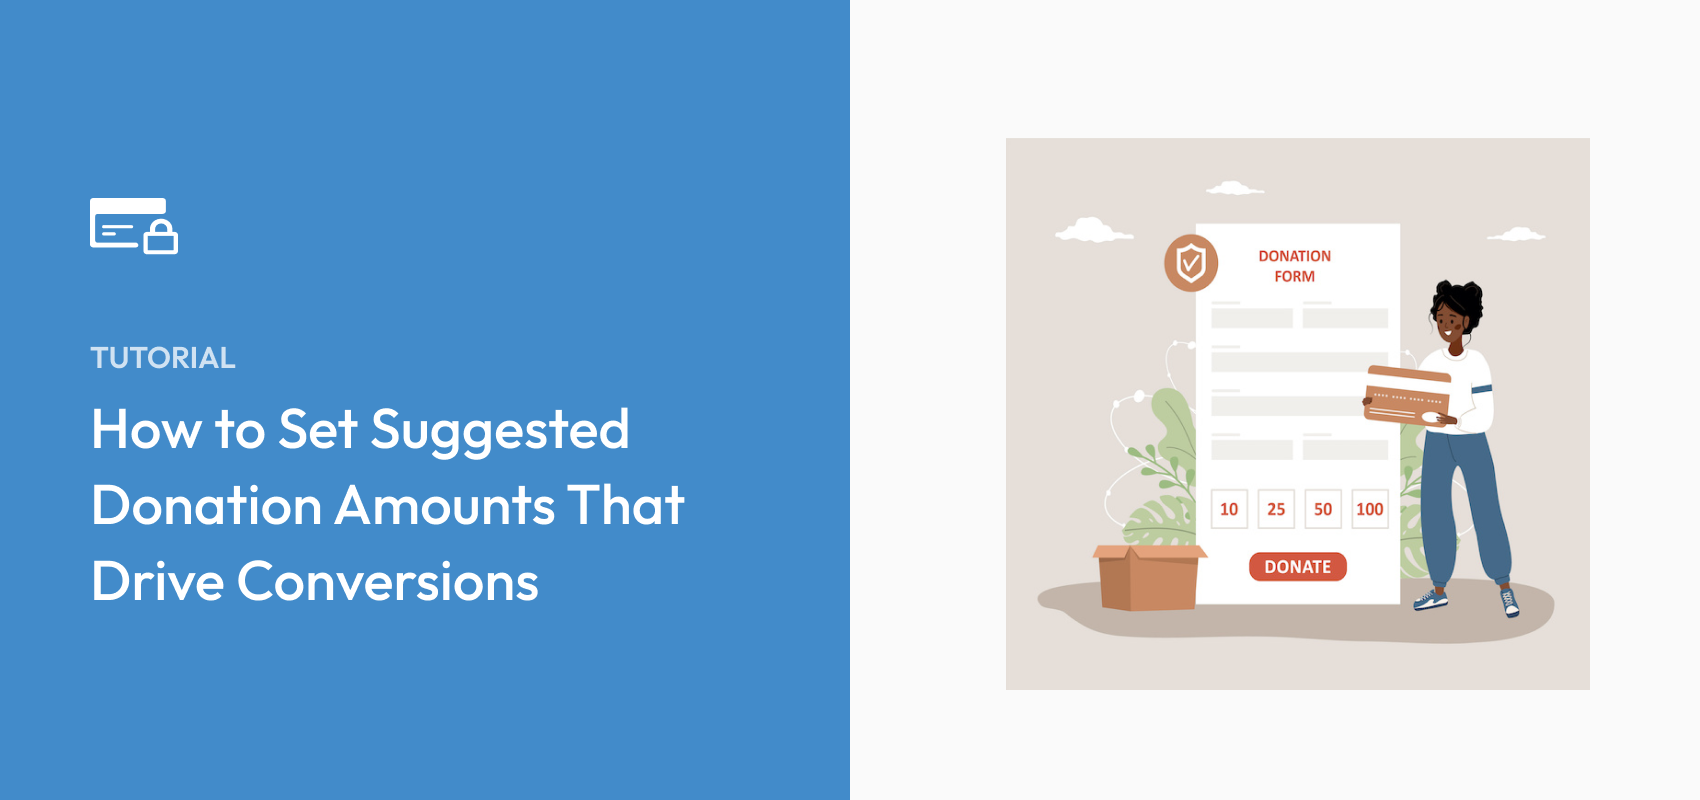 How to Set Suggested Donation Amounts That Drive Conversions